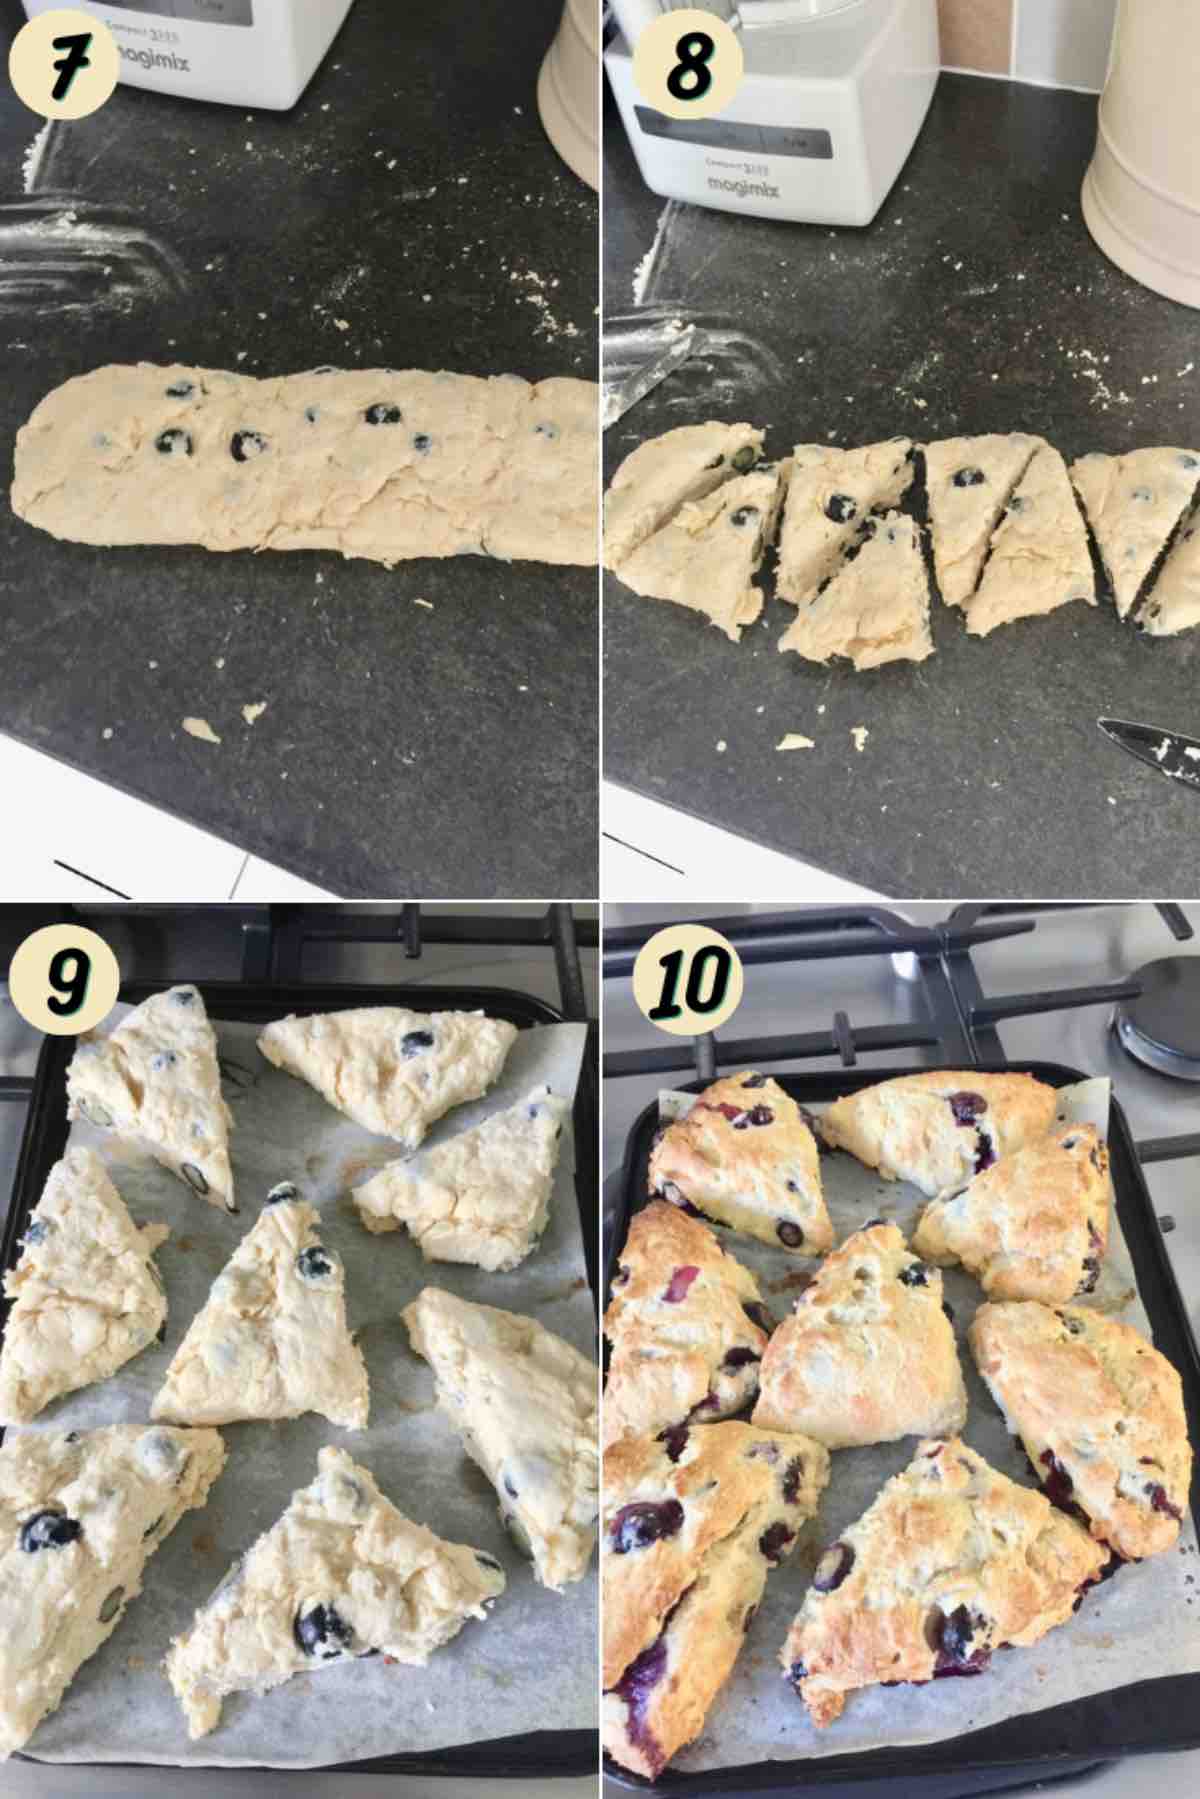 Cutting scones and before and after baking them.